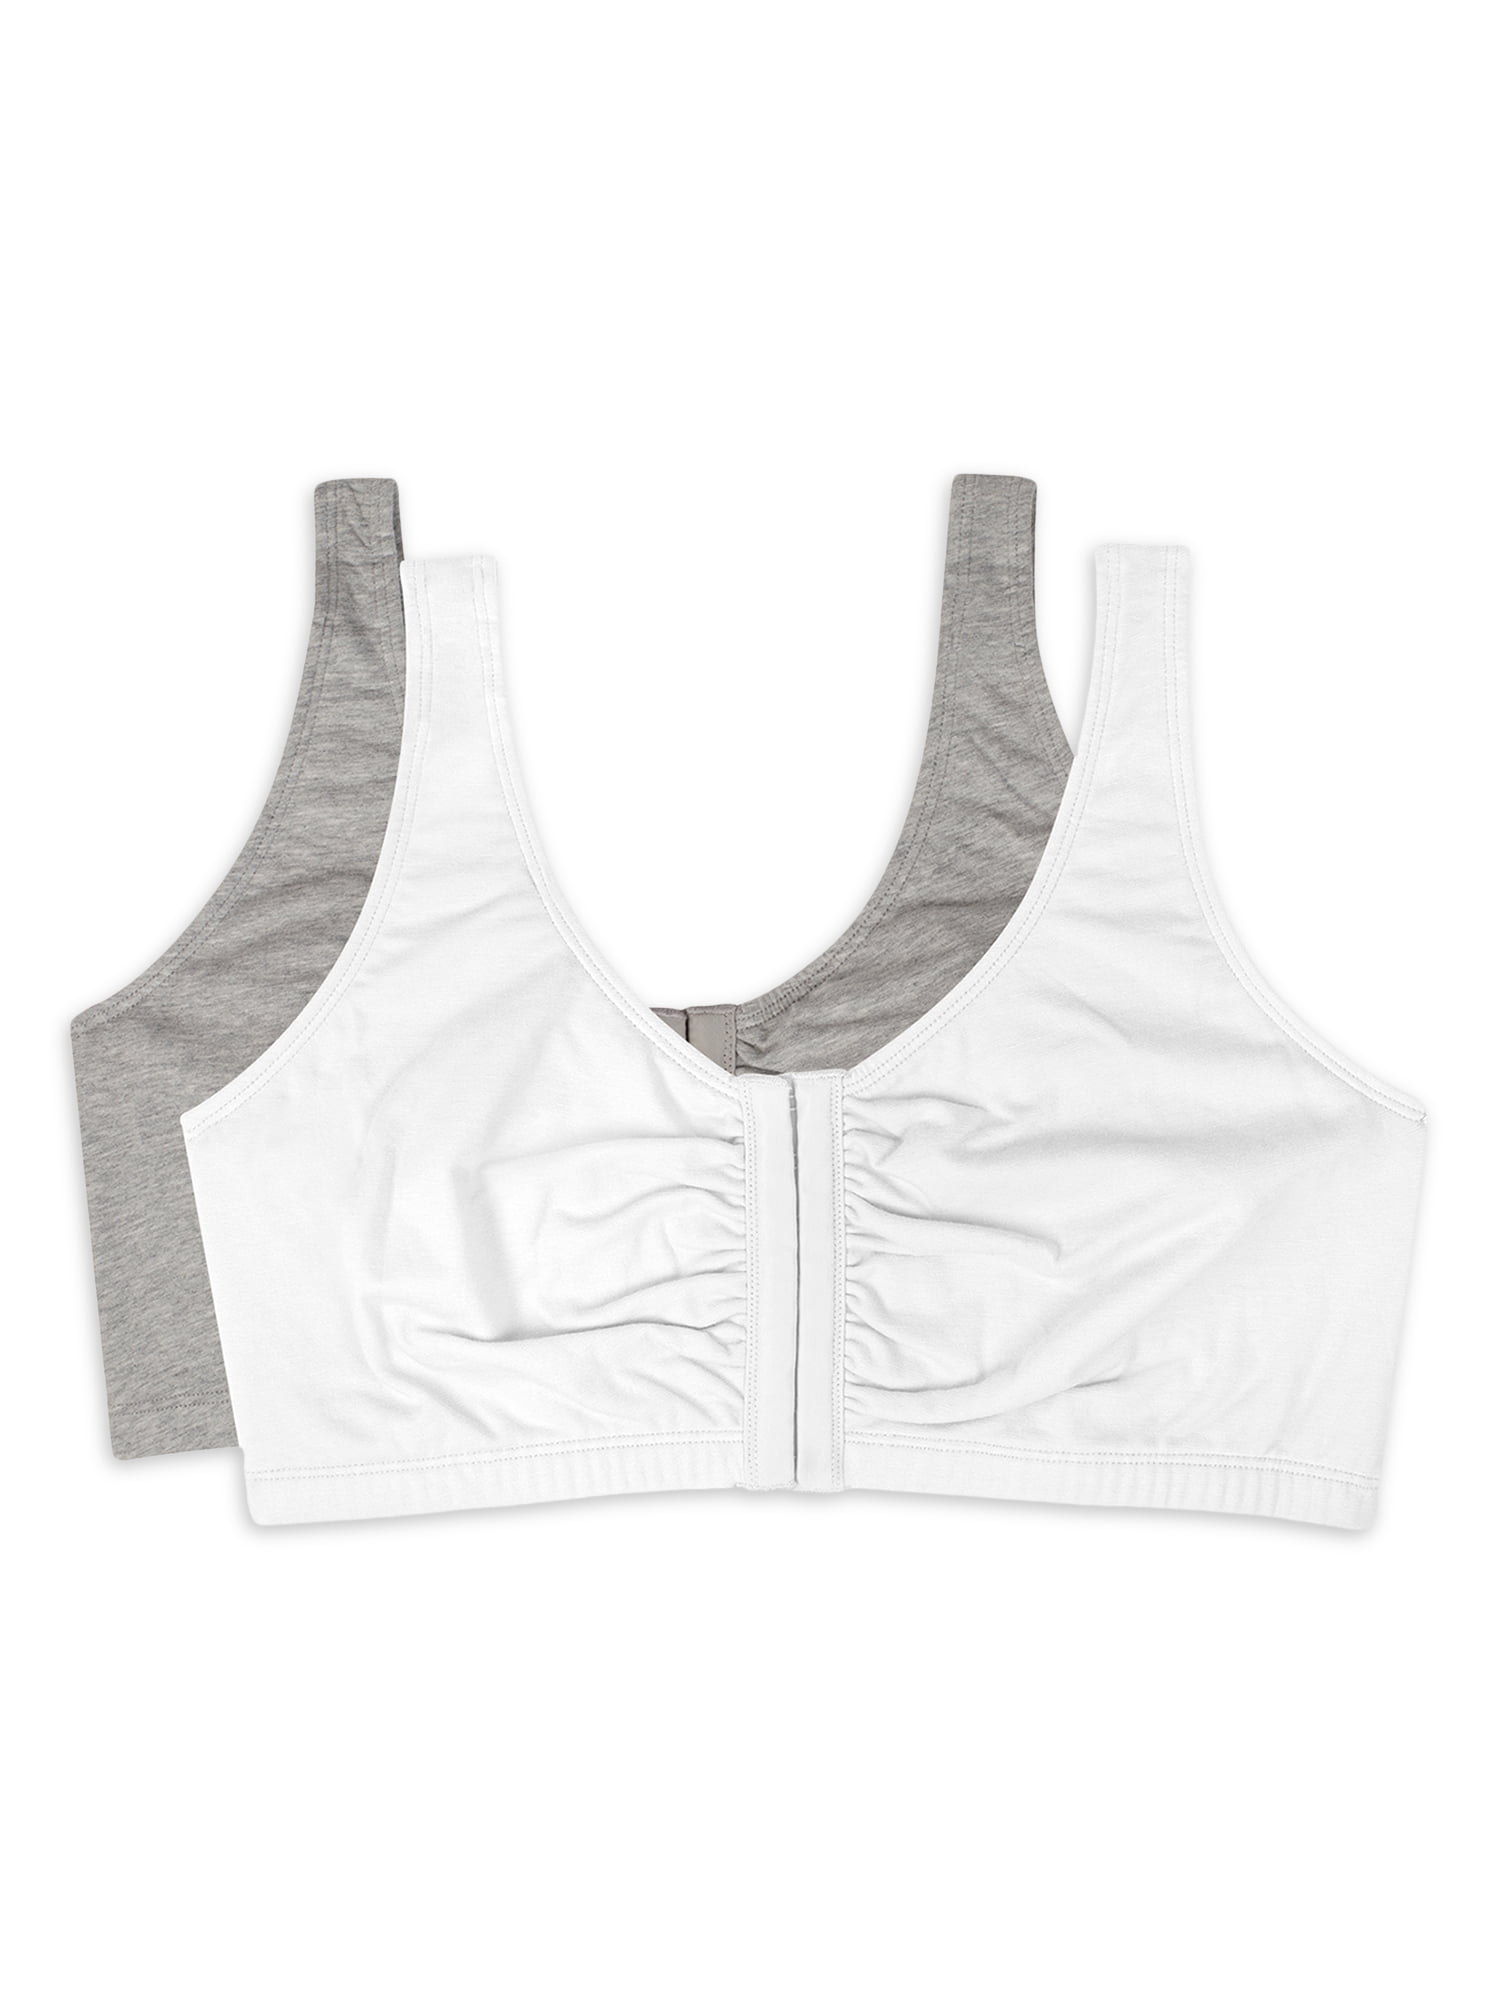 Fruit of the Loom Women's Front Close Bra, 2 Pack, Grey and White